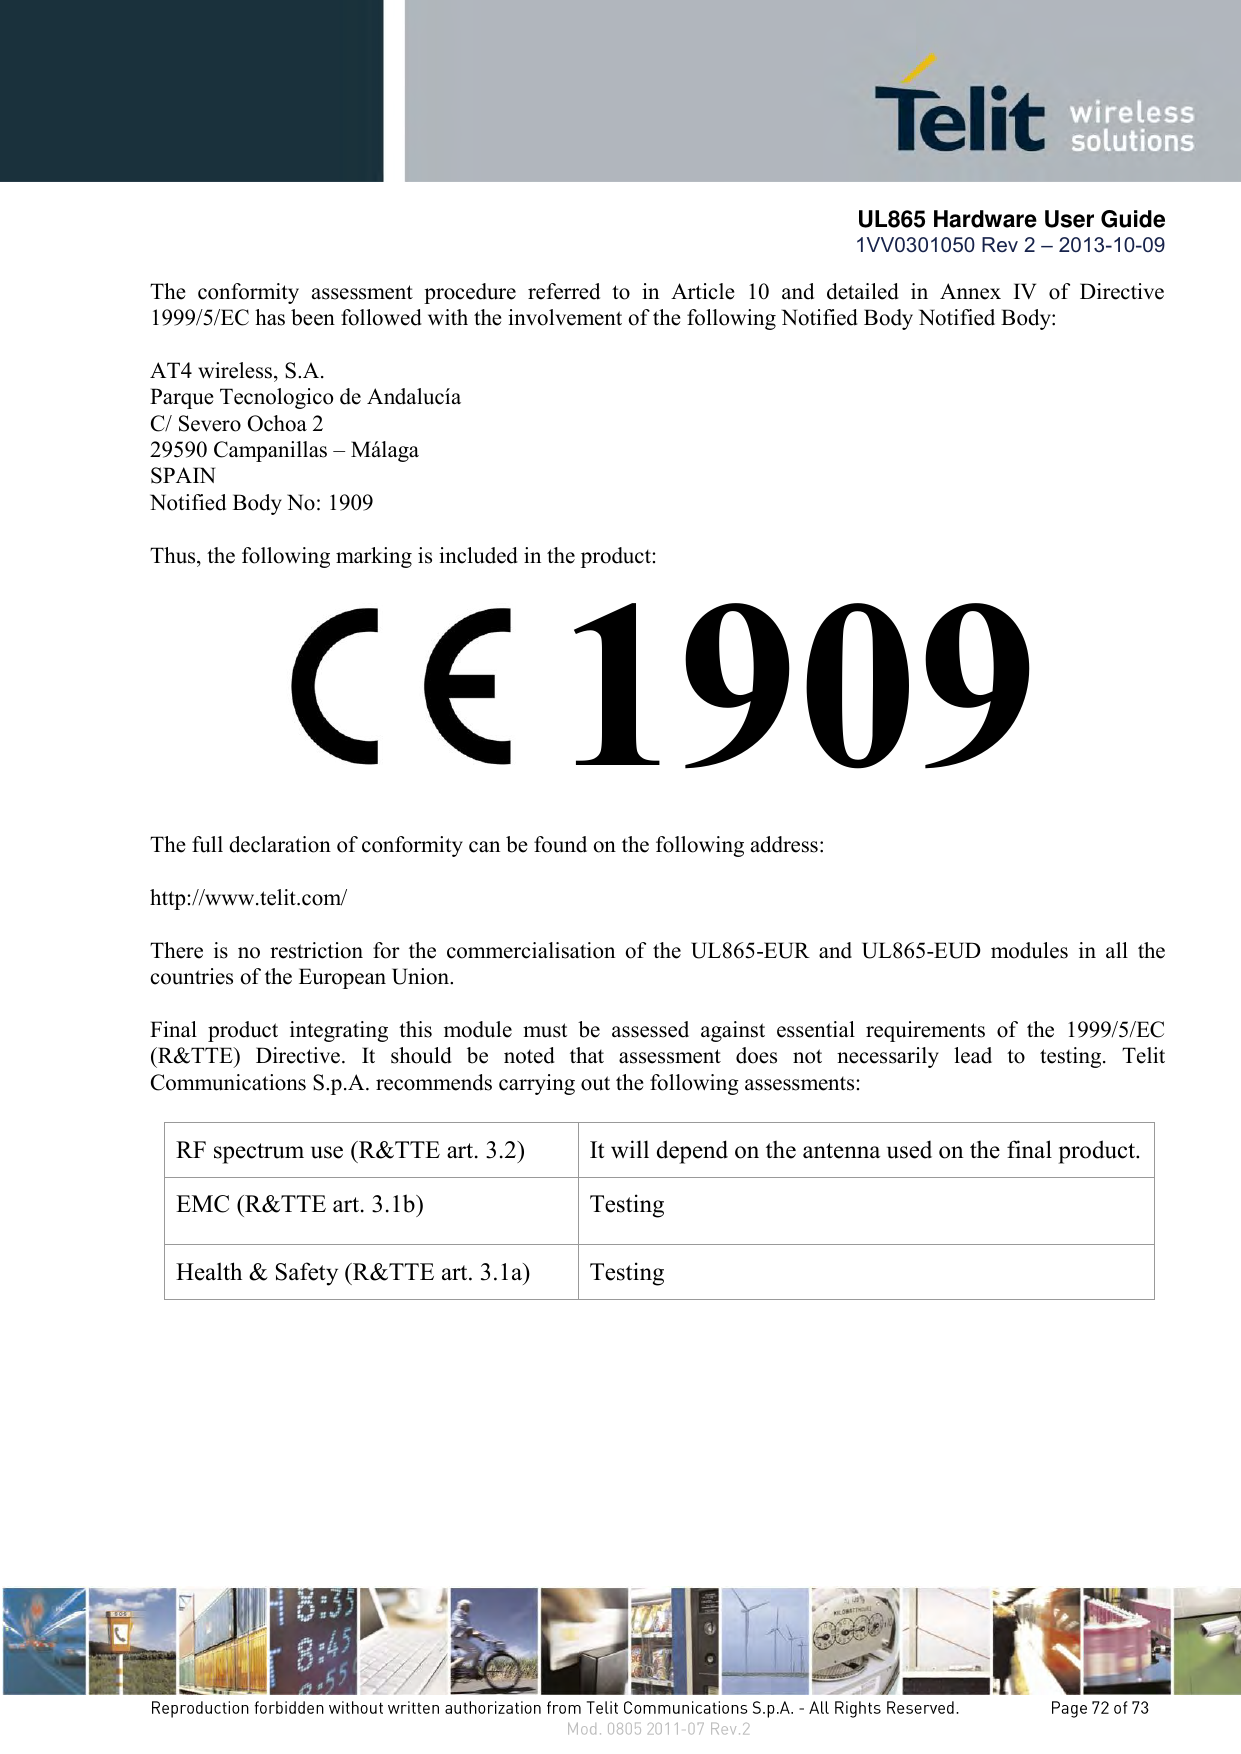       UL865 Hardware User Guide 1VV0301050 Rev 2 – 2013-10-09   The  conformity  assessment  procedure  referred  to  in  Article  10  and  detailed  in  Annex  IV  of  Directive 1999/5/EC has been followed with the involvement of the following Notified Body Notified Body:  AT4 wireless, S.A. Parque Tecnologico de Andalucía C/ Severo Ochoa 2 29590 Campanillas – Málaga SPAIN Notified Body No: 1909  Thus, the following marking is included in the product:           The full declaration of conformity can be found on the following address:  http://www.telit.com/  There  is  no  restriction  for  the  commercialisation  of  the  UL865-EUR  and  UL865-EUD  modules  in  all  the countries of the European Union.   Final  product  integrating  this  module  must  be  assessed  against  essential  requirements  of  the  1999/5/EC (R&amp;TTE)  Directive.  It  should  be  noted  that  assessment  does  not  necessarily  lead  to  testing.  Telit Communications S.p.A. recommends carrying out the following assessments:  RF spectrum use (R&amp;TTE art. 3.2) It will depend on the antenna used on the final product. EMC (R&amp;TTE art. 3.1b) Testing Health &amp; Safety (R&amp;TTE art. 3.1a) Testing  1909 